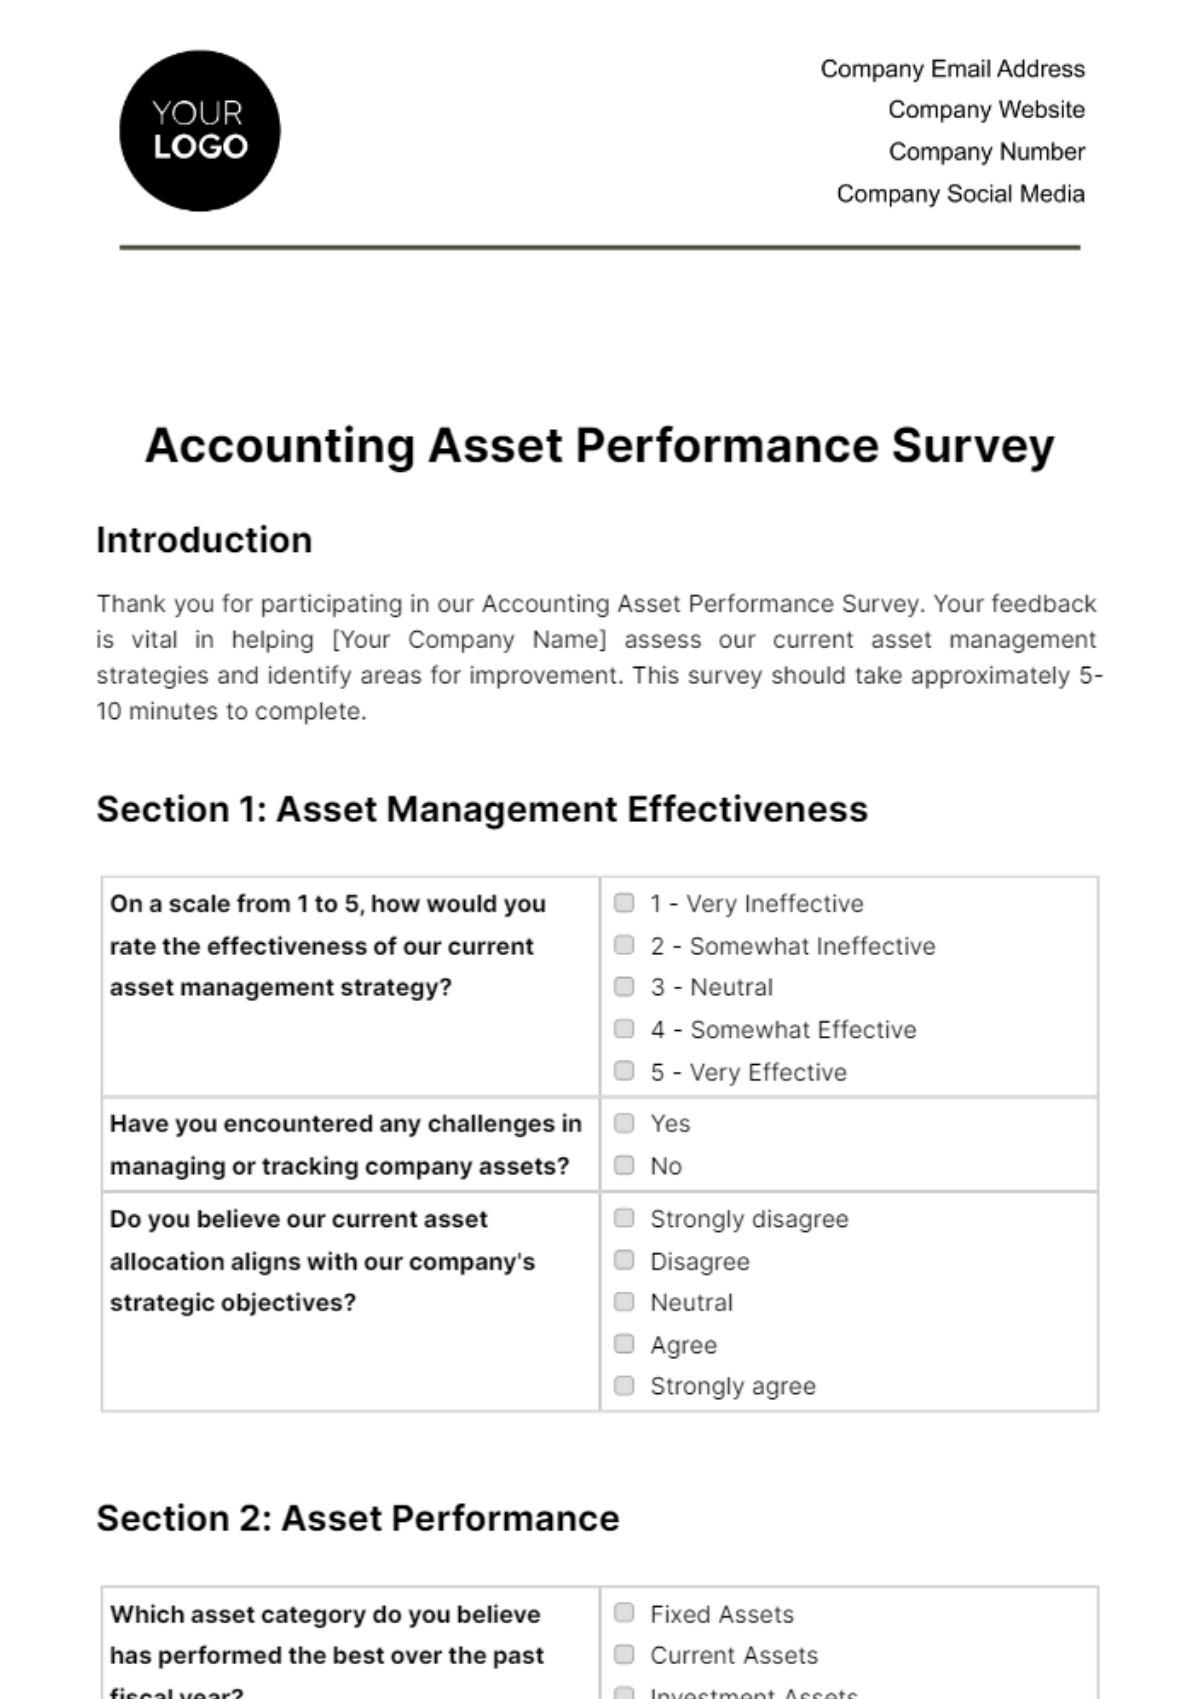 Accounting Asset Performance Survey Template